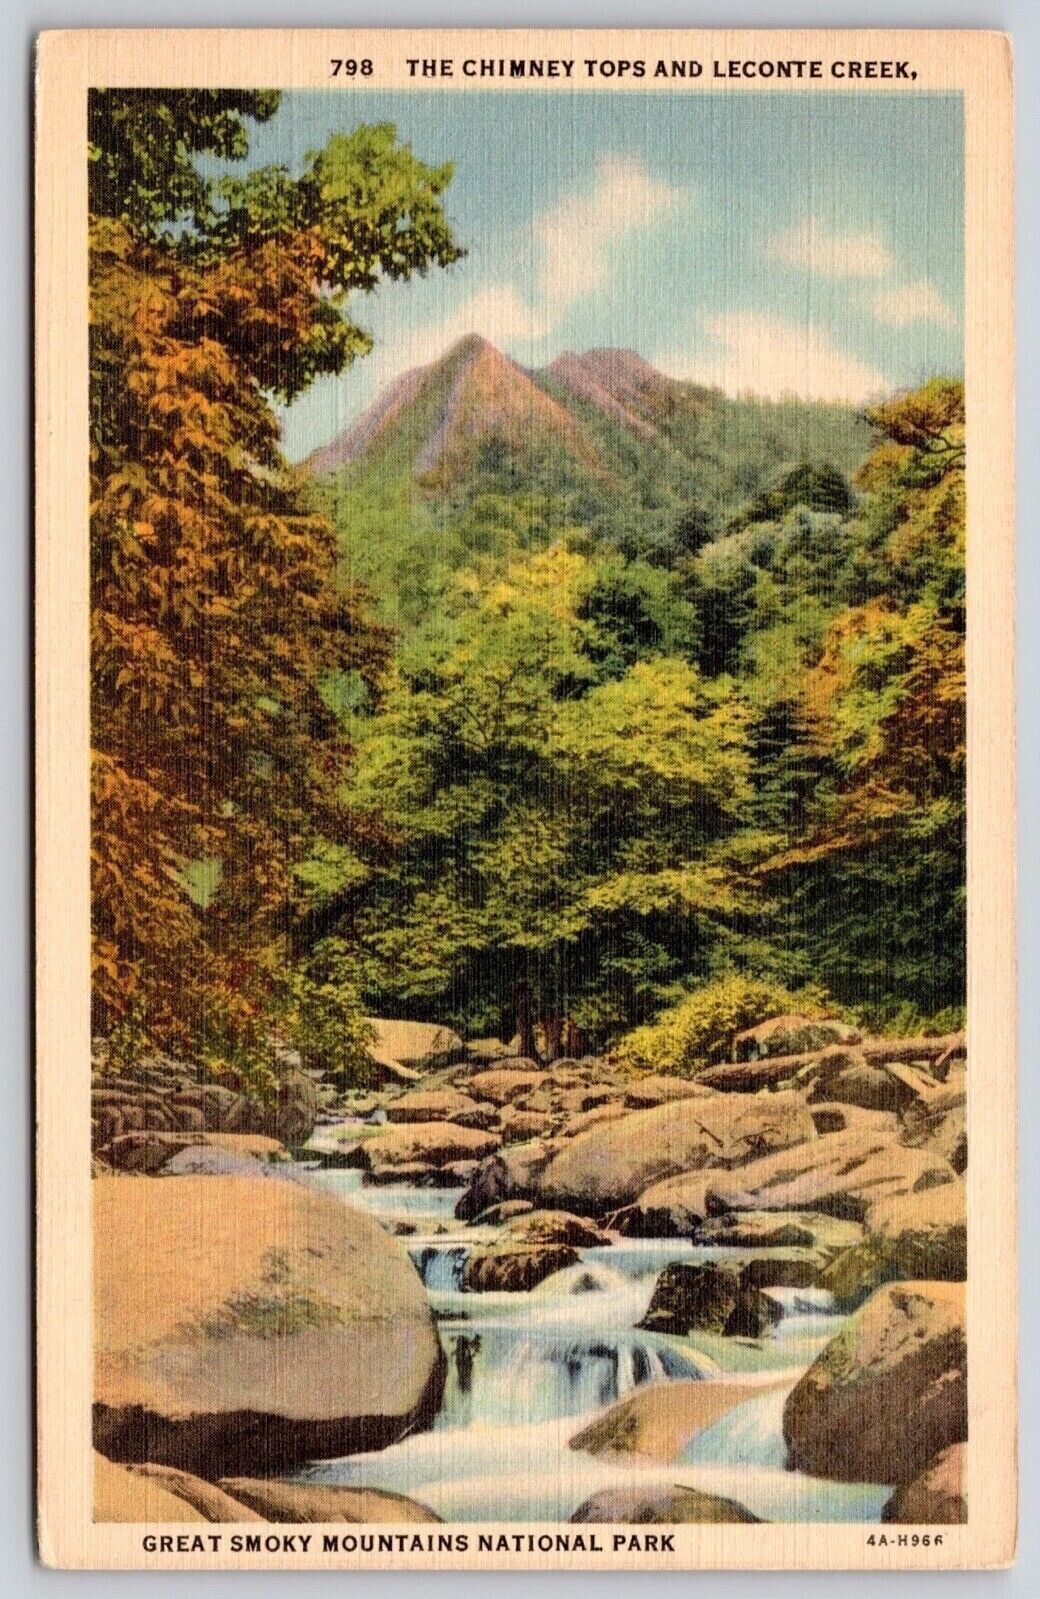 Chimney Tops Leconte Creek Great Smoky Mountain National Park Forest PM Postcard